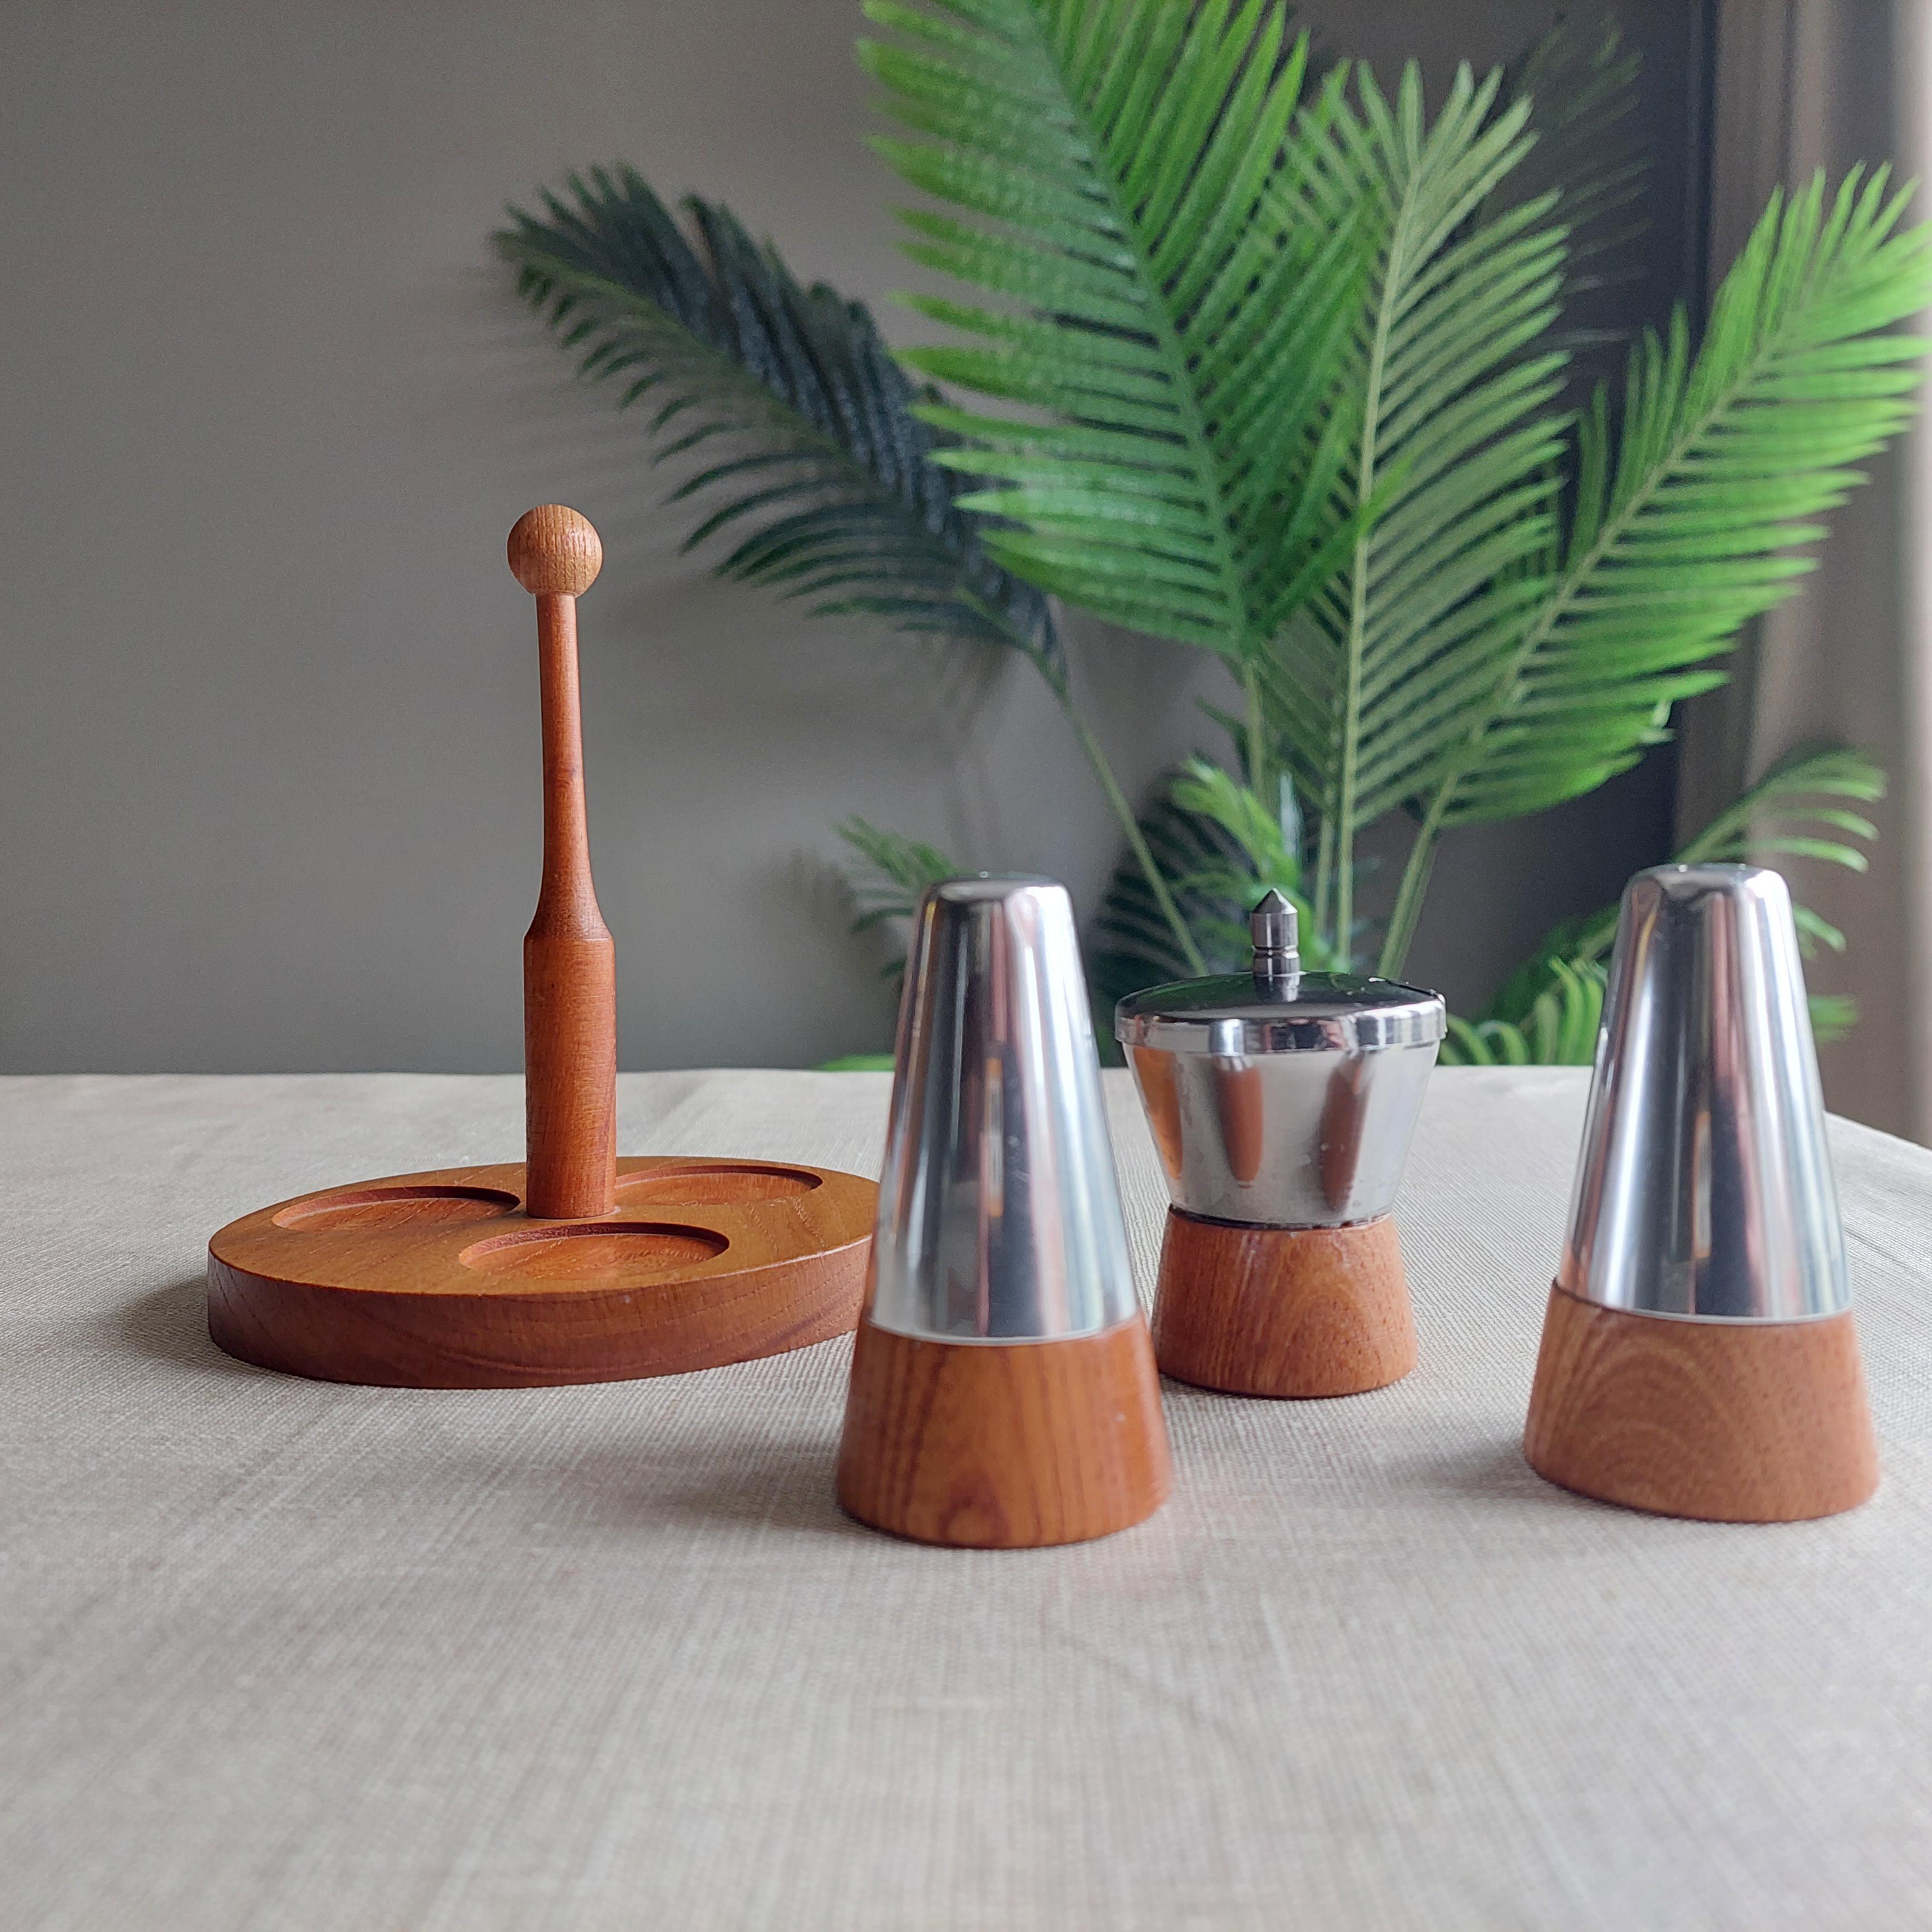 Mid-Century teak and metal cruet set (Danish/Scandinavian)
Stamped Foreign underneath, so most probably from Germany
Circa 1960s

Comprising of a tray/ holder salt and pepper shakers and a mustard or pot  with lid.
Made of teak and silver coloured